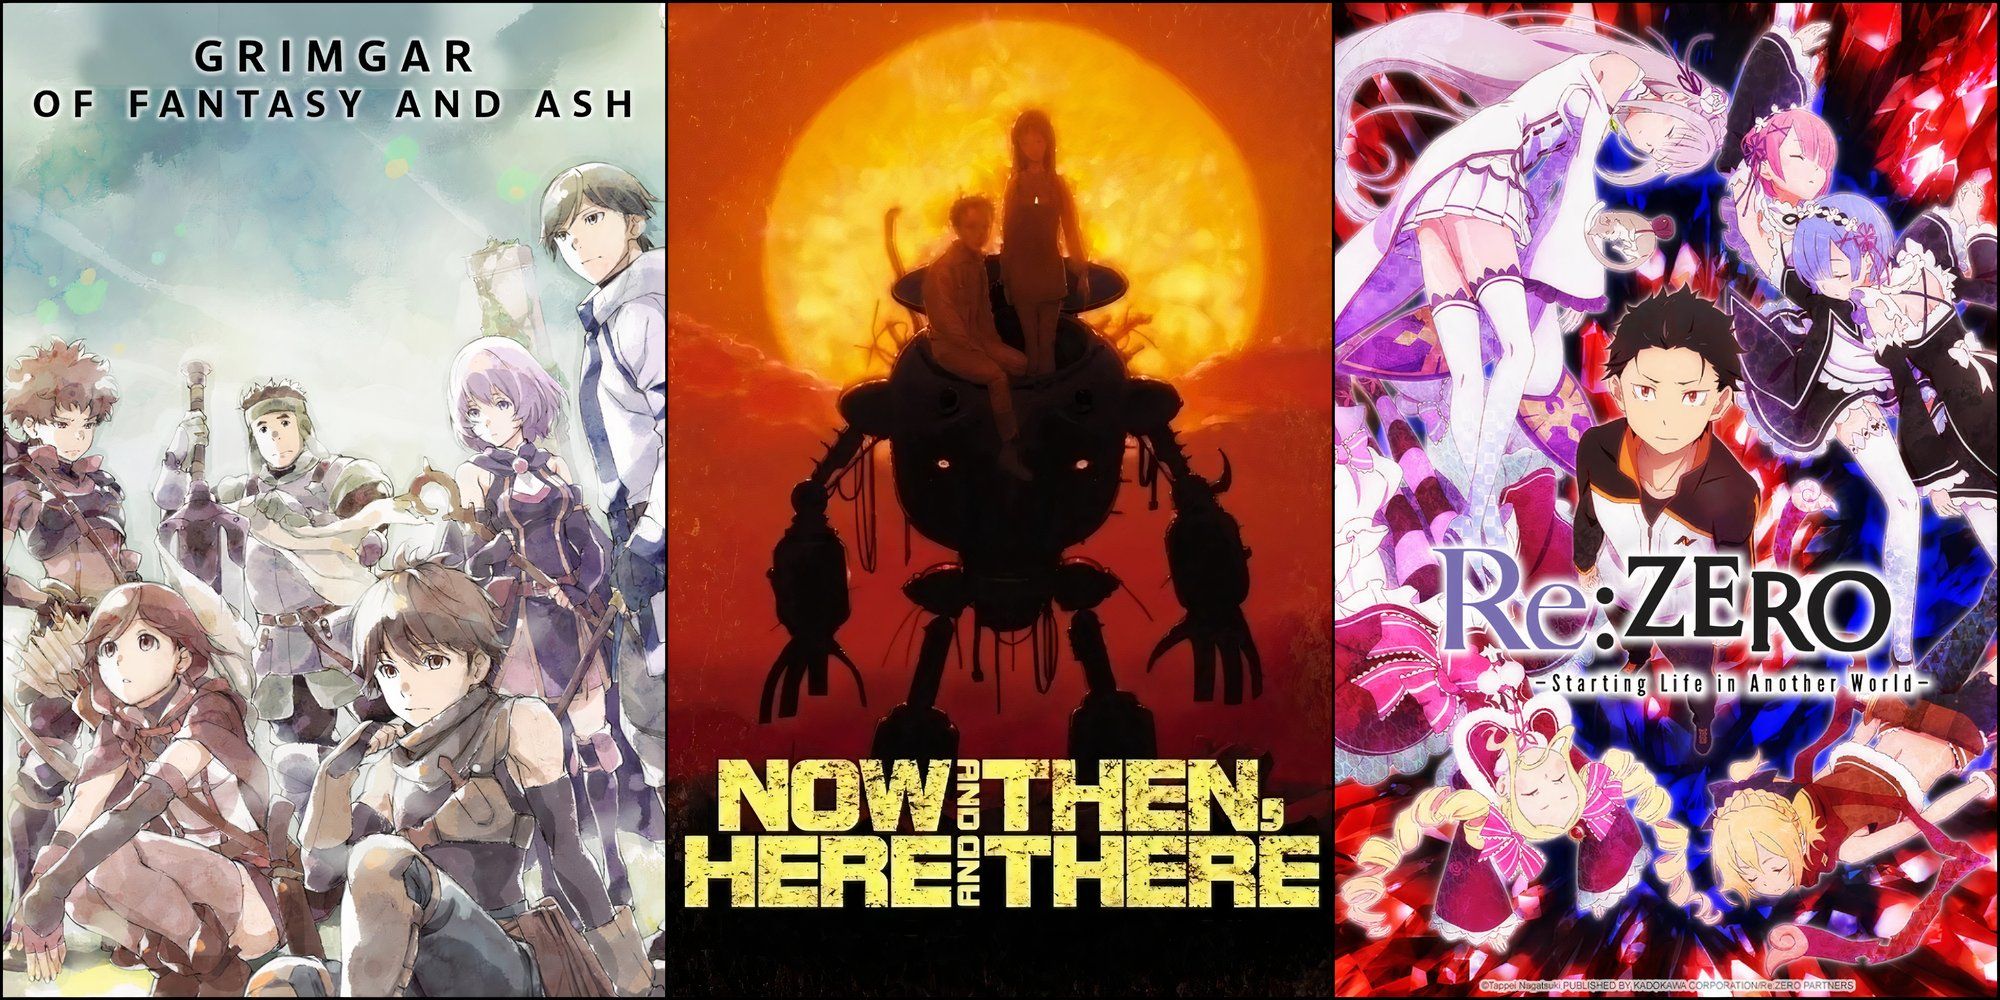 Grimgar, Now and Then Here and There, Re:Zero